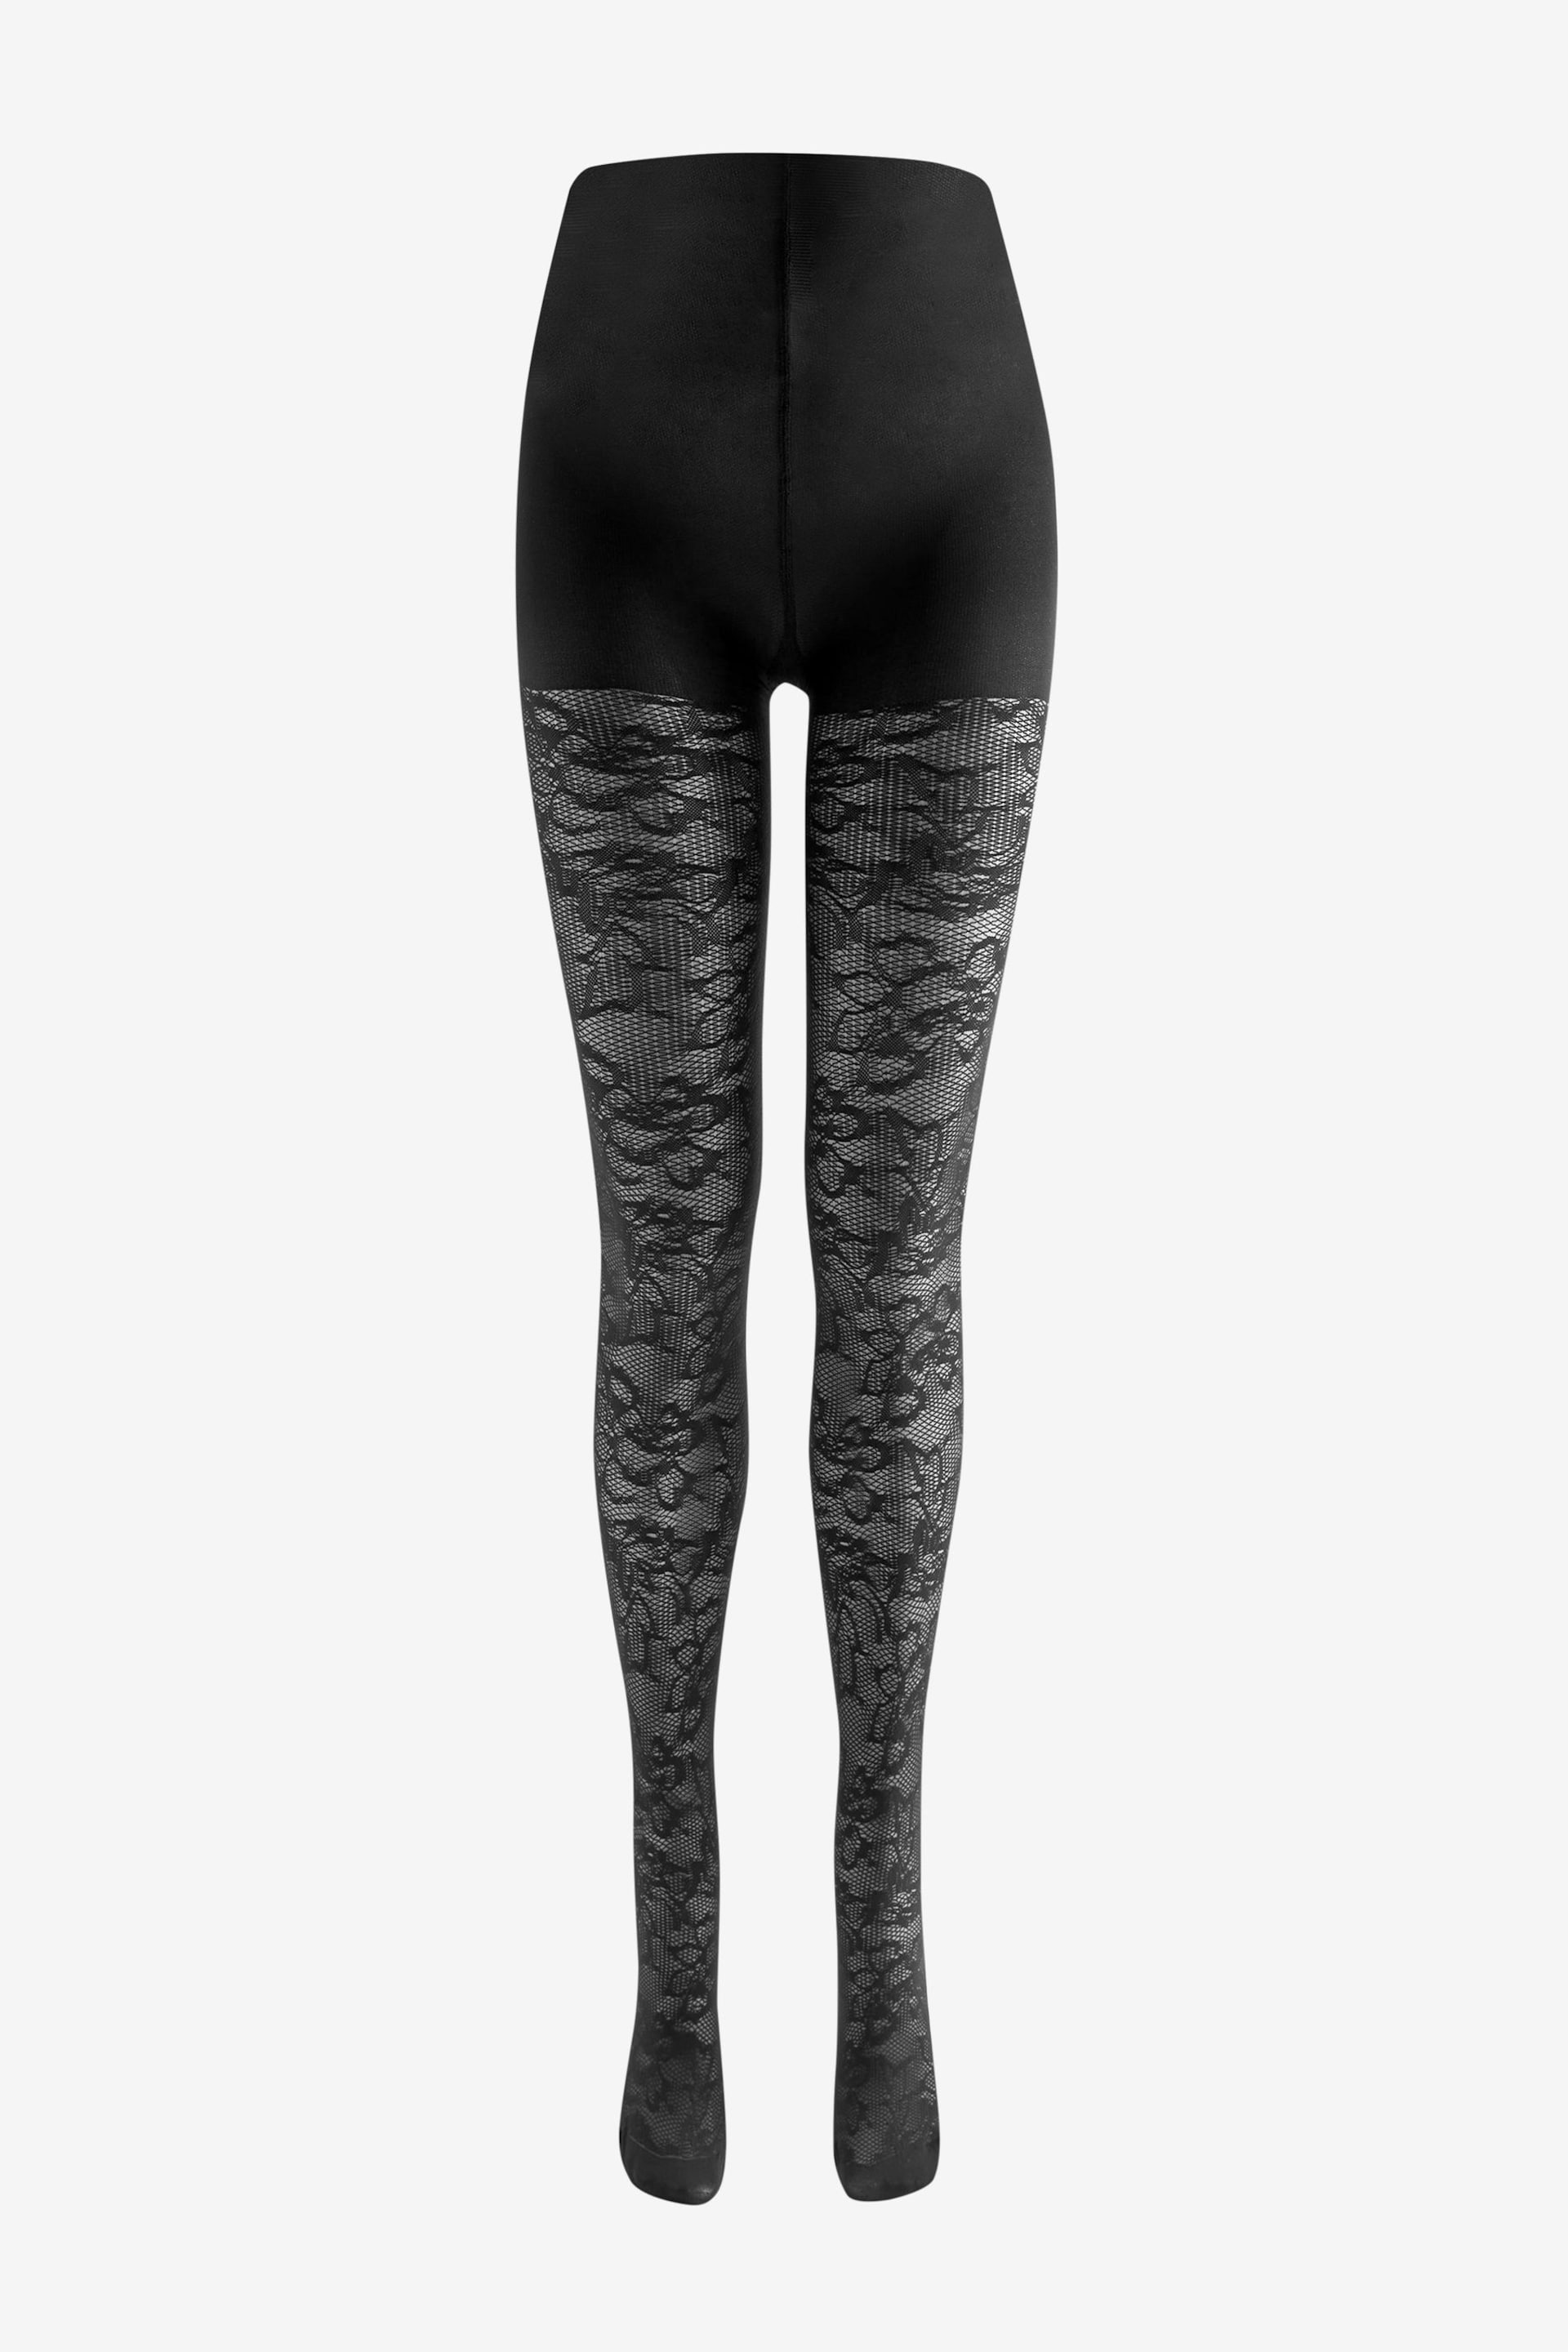 Black Lace Maternity Pattern Tights - Image 5 of 6